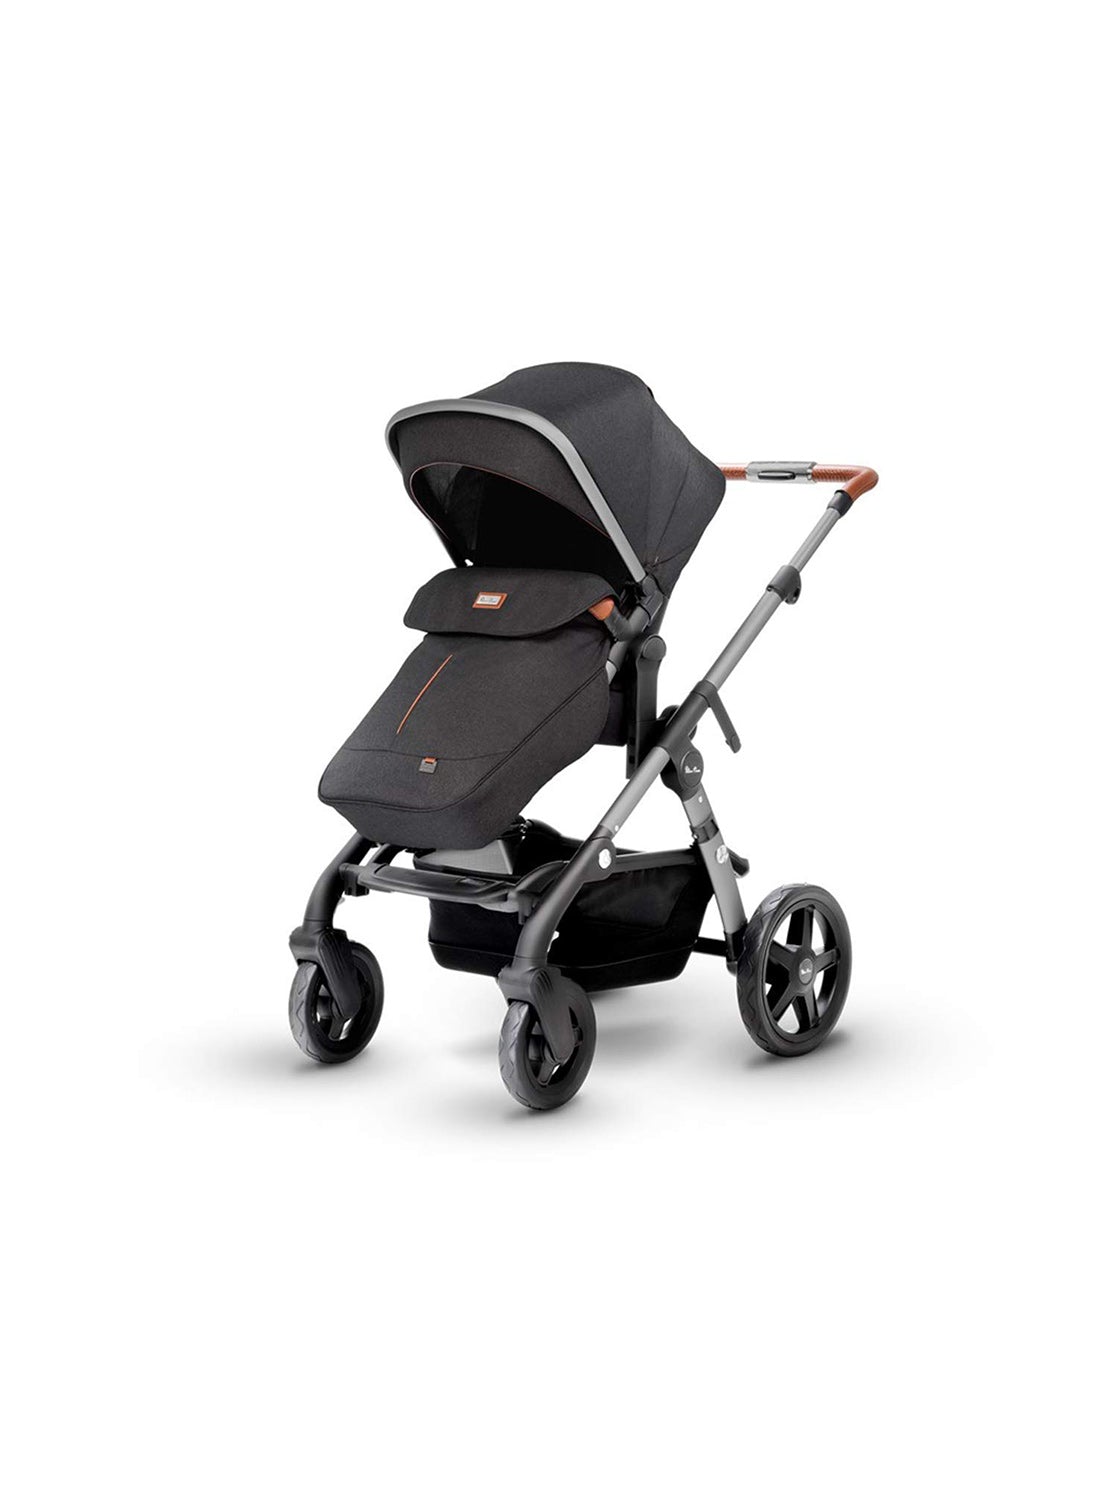 SILVER CROSS Single to Double Pram System Baby Stroller with Bassinet - ANB Baby -$1000 - $2000